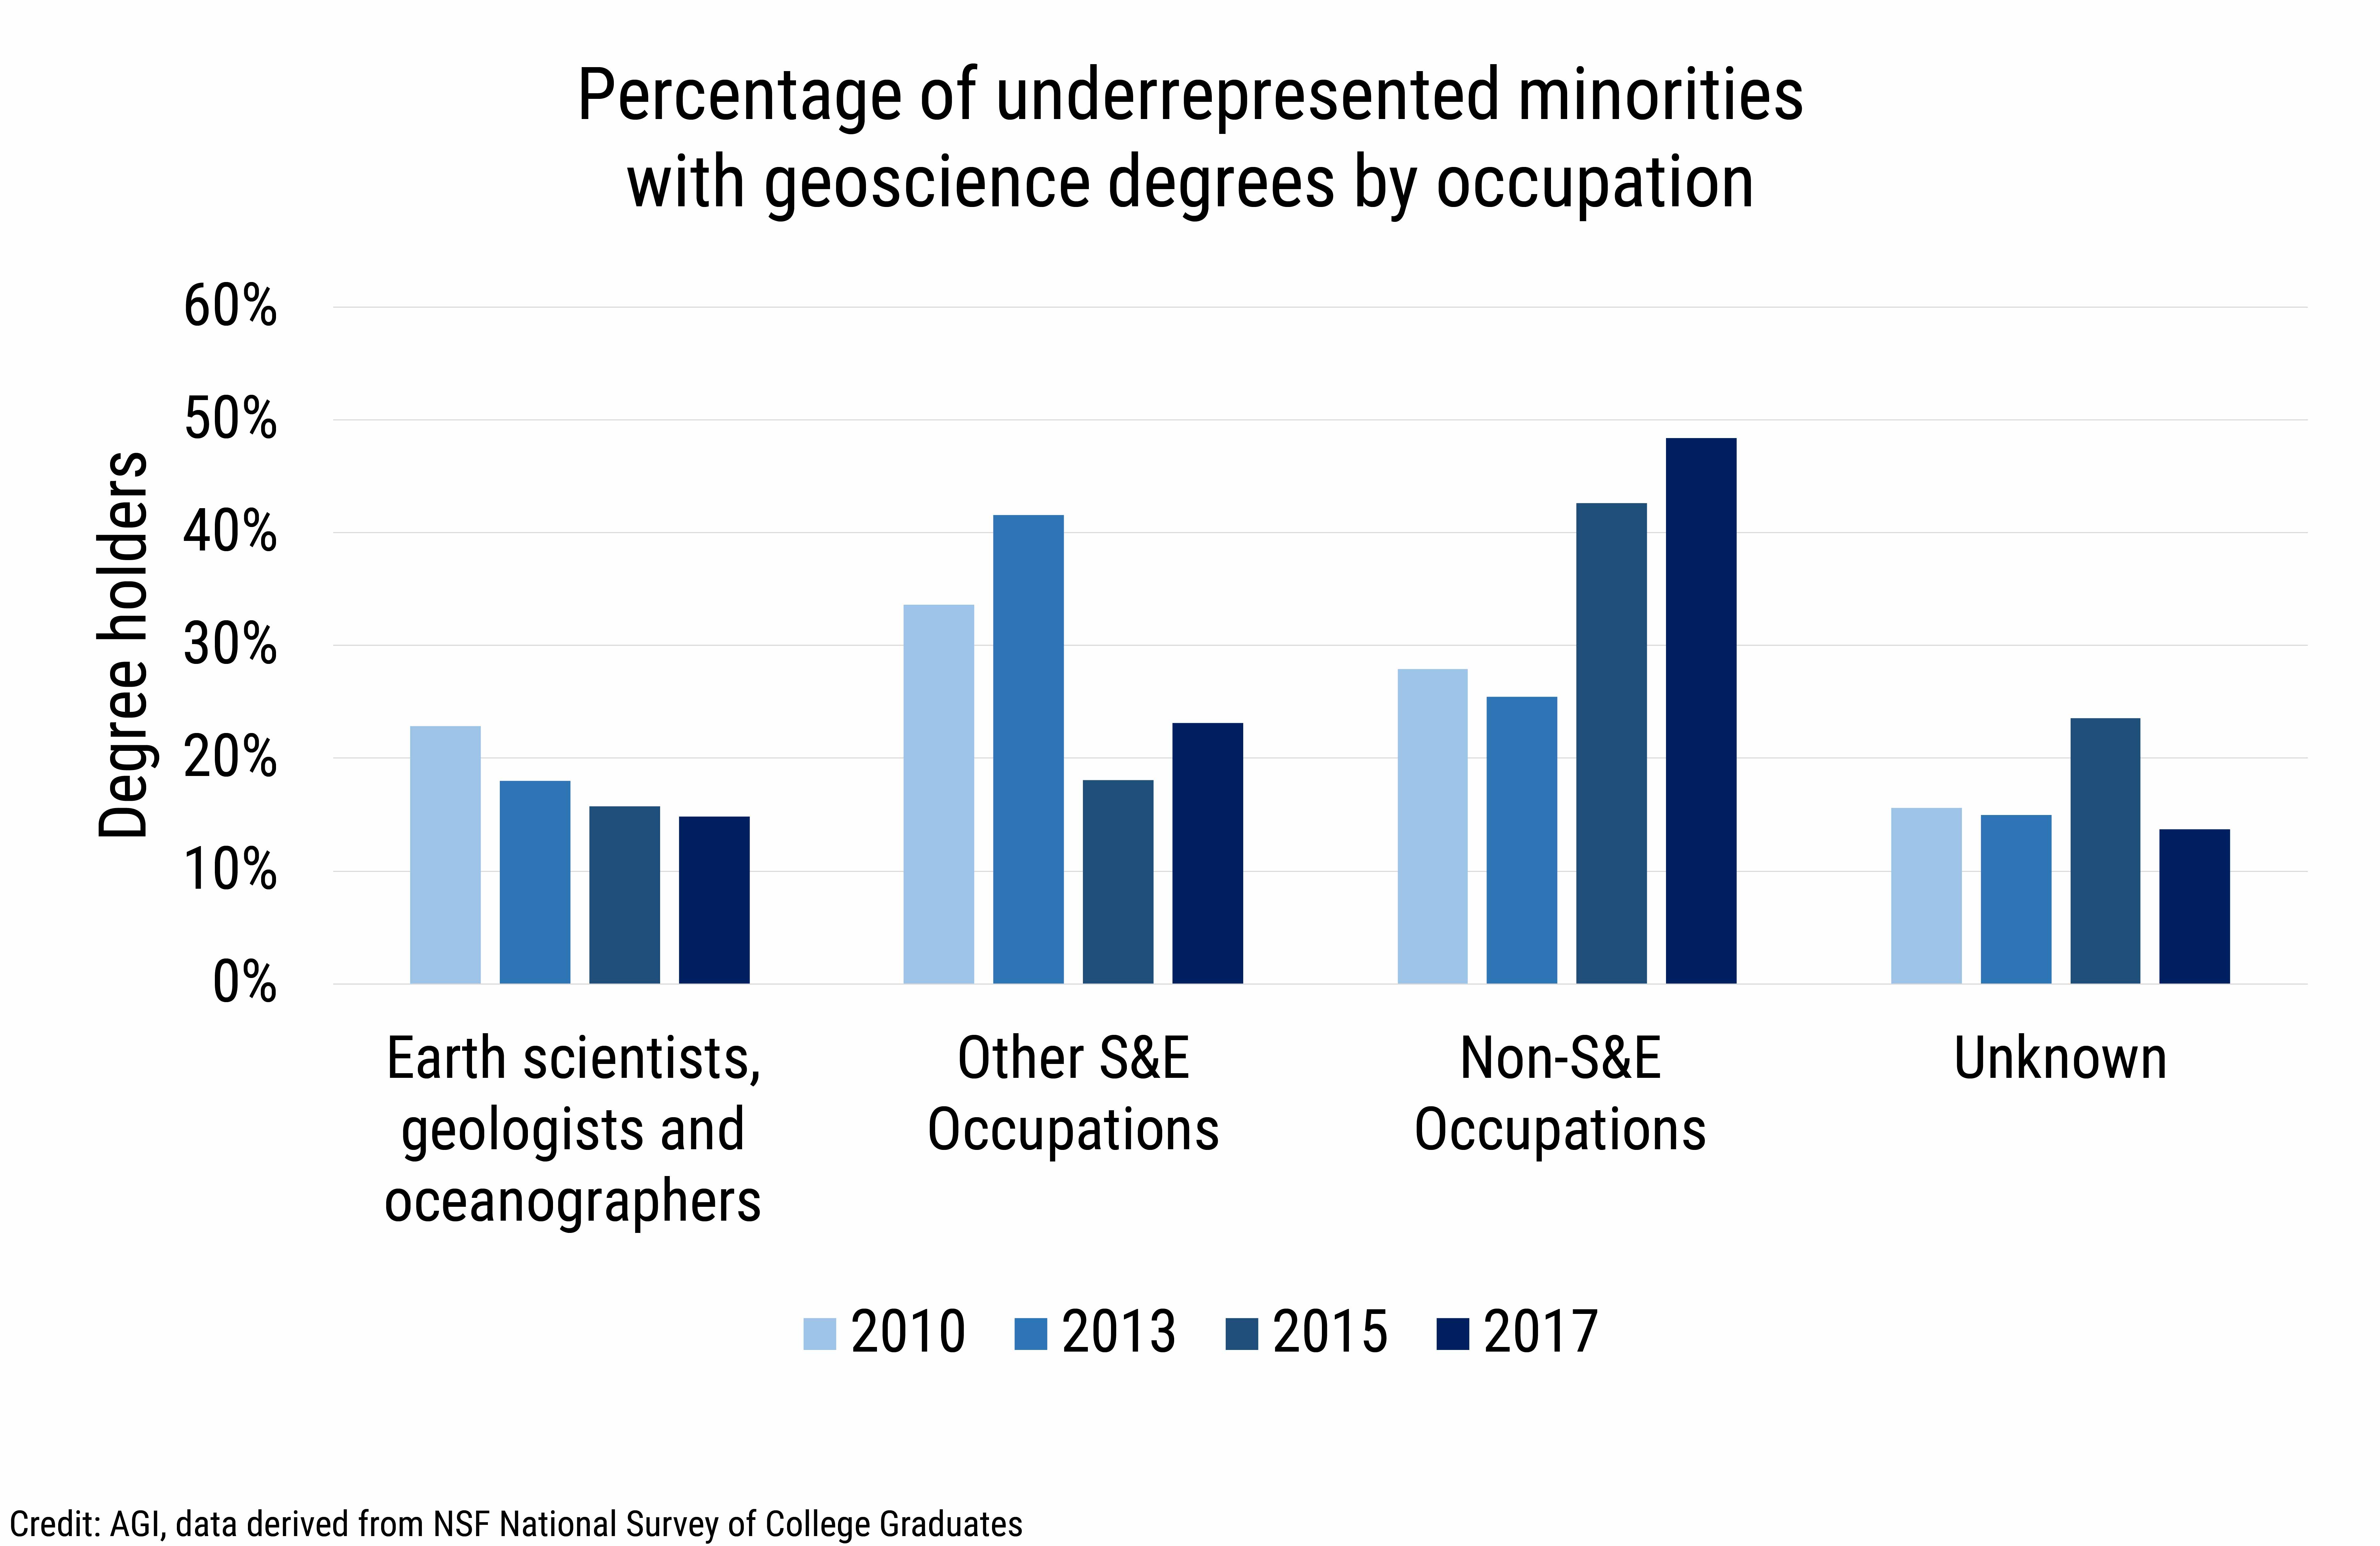 DB2020-023 chart14-Percentage of underrepresented minorities with geoscience degrees by occupation (Credit: AGI, data derived from NSF National Survey of College Graduates)